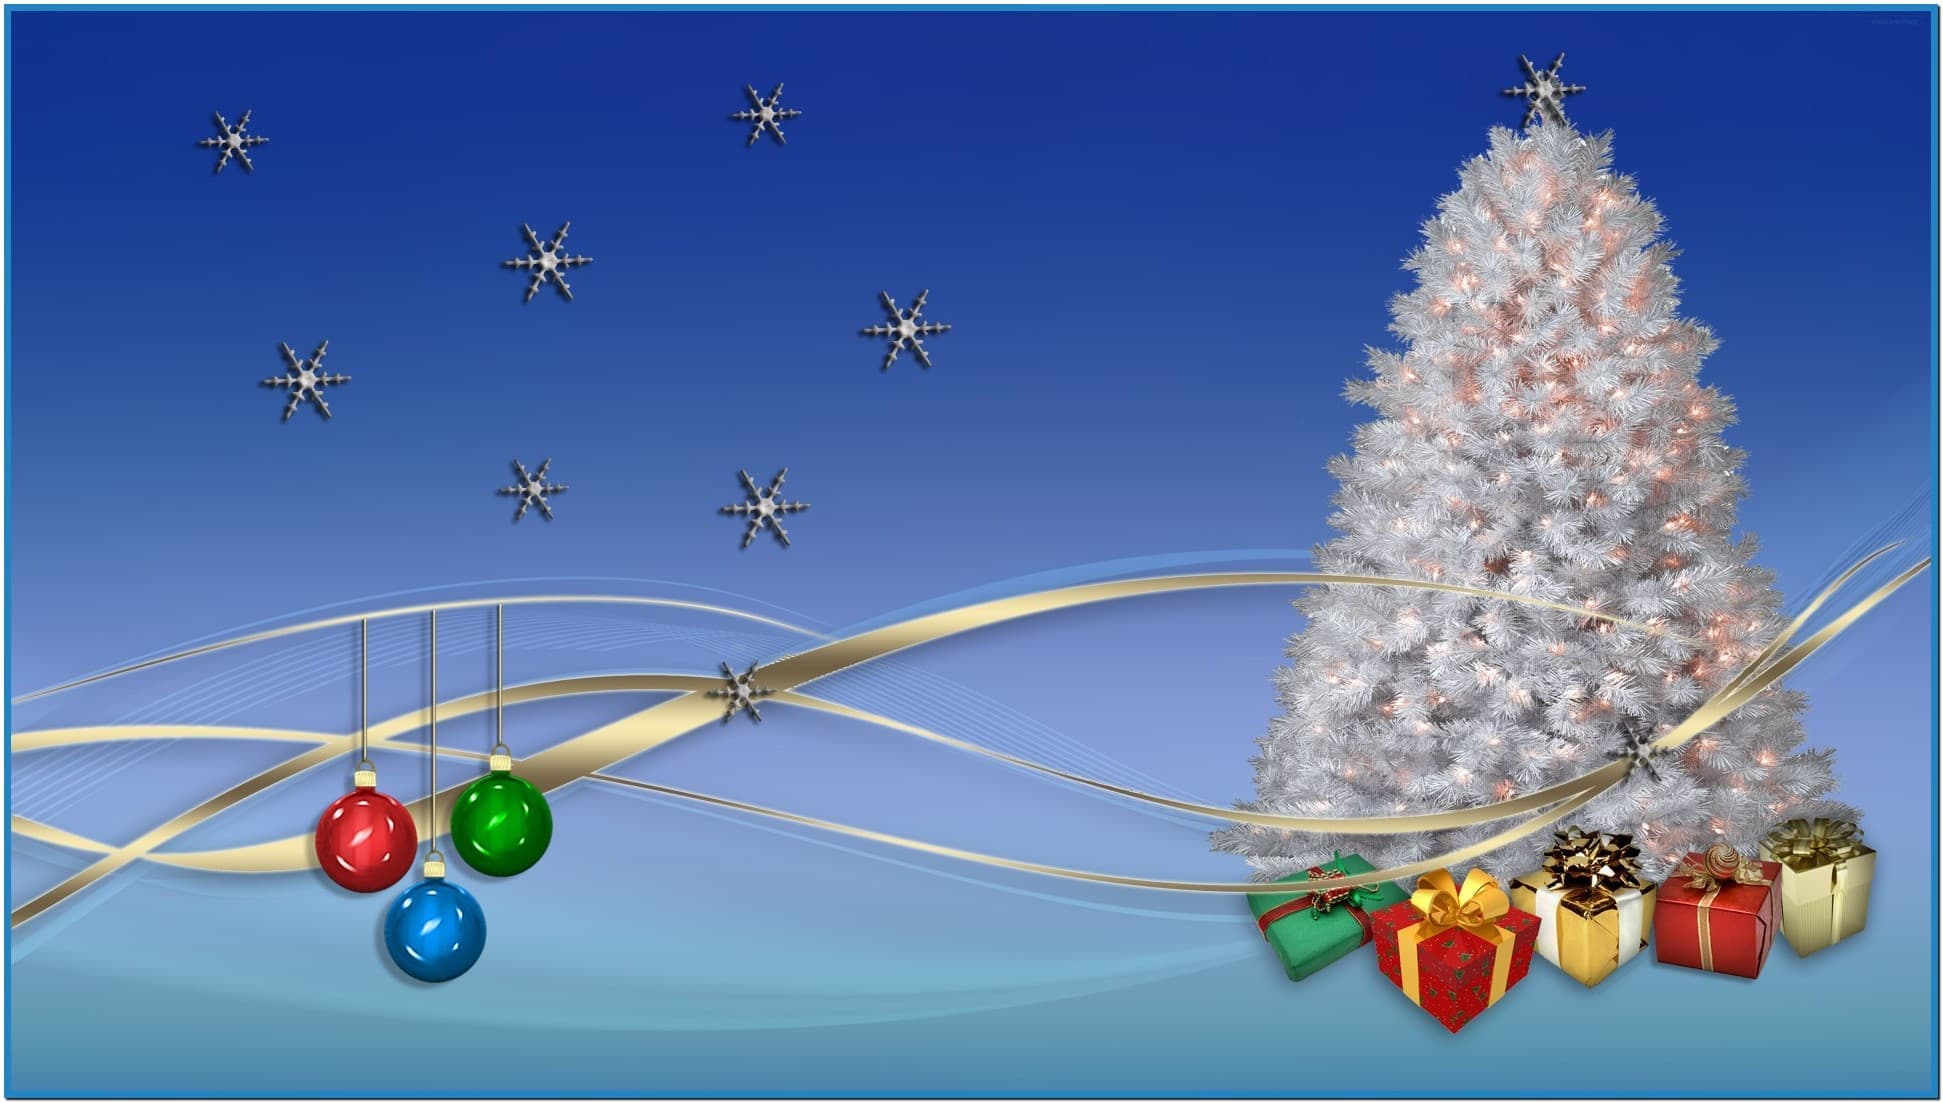 Christmas Live Wallpaper Android apexwallpaperscom